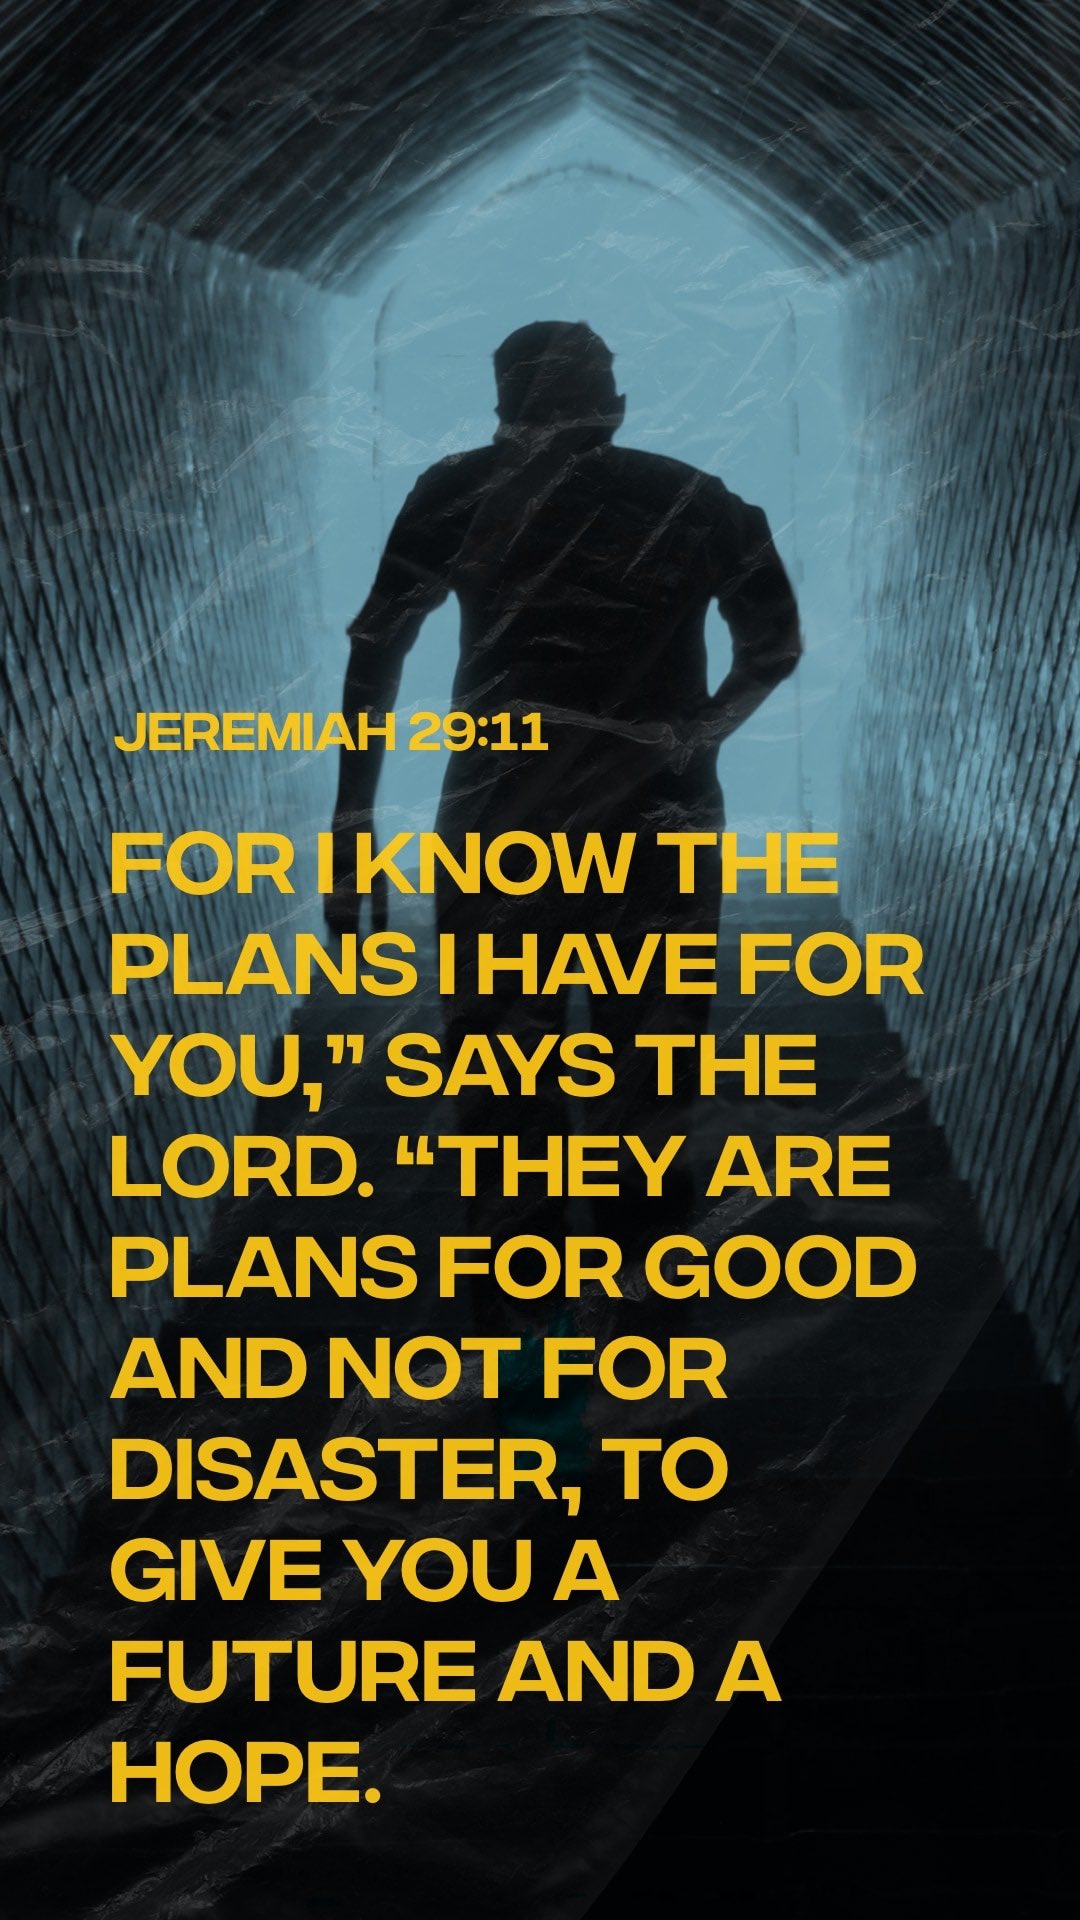 JEREMIAH 29:11 FOR IKNOW THE PLANS IHAVE FOR YOU;' 11 SAYS THE LORD: "THEY ARE PLANS FOR GOOD AND NOT FOR DISASTER, TO GIVE YOU A FUTURE AND A HOPE